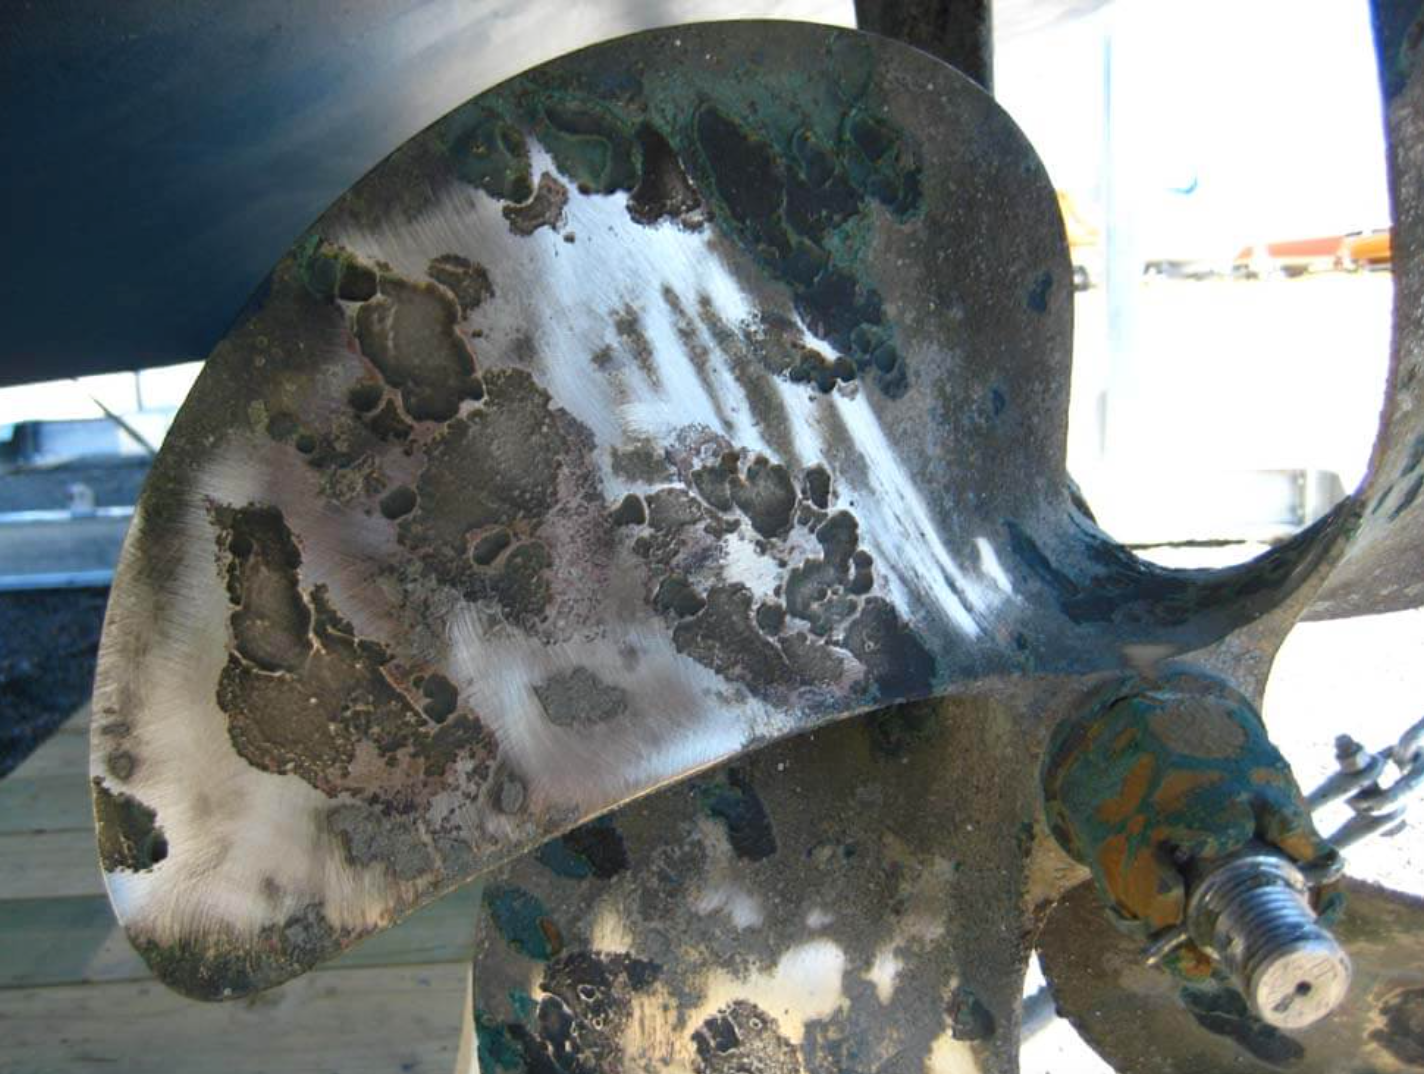 corroded propeller, galvanic corrosion on a boat propeller